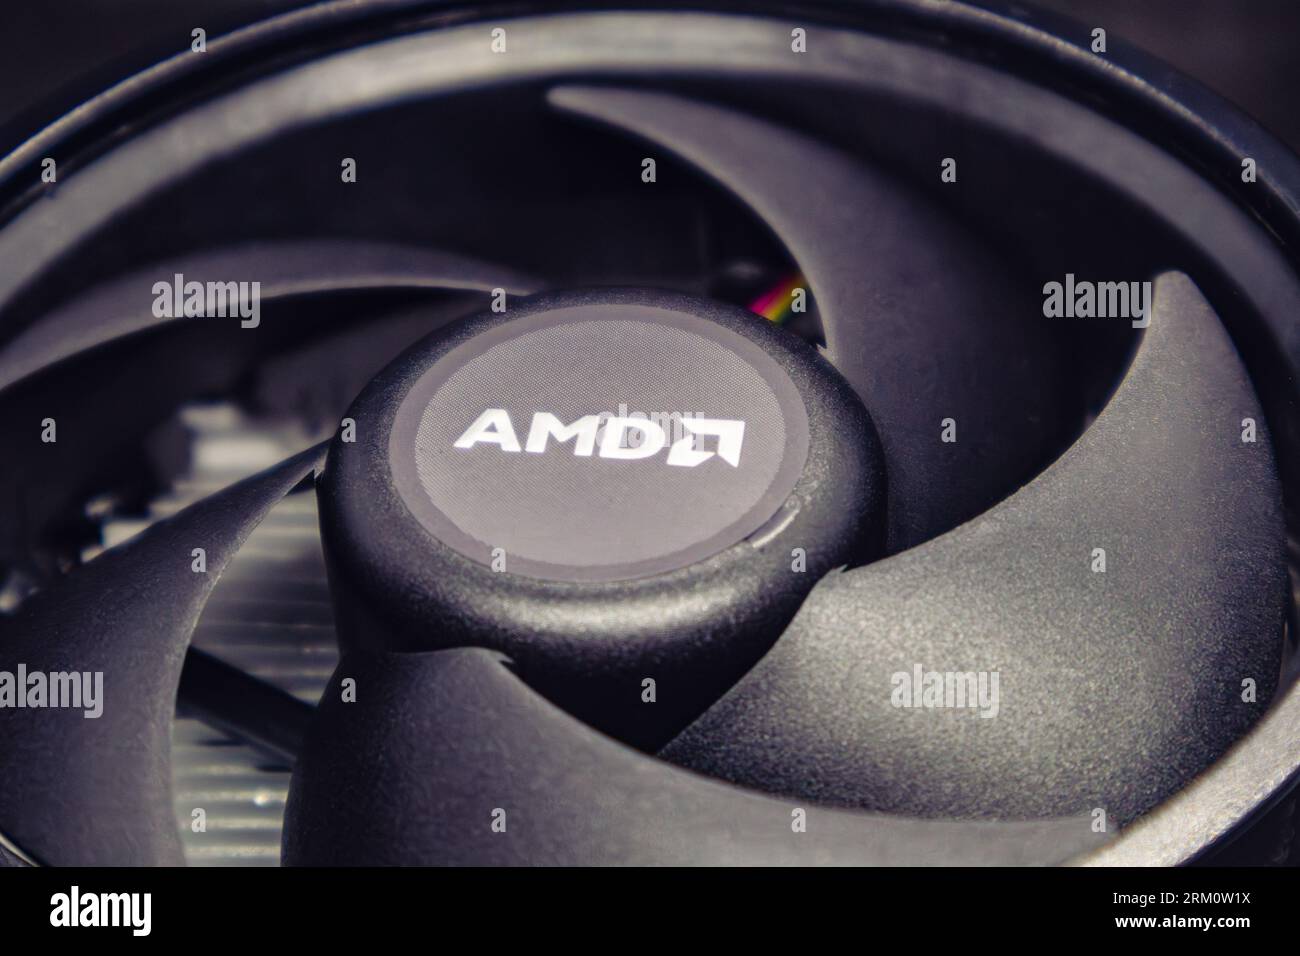 Kyiv, Ukraine - January 05, 2022: AMD cooling radiator for desktop PC CPU unit close-up. Black cooler fan, PC hardware details. Components from modern Stock Photo